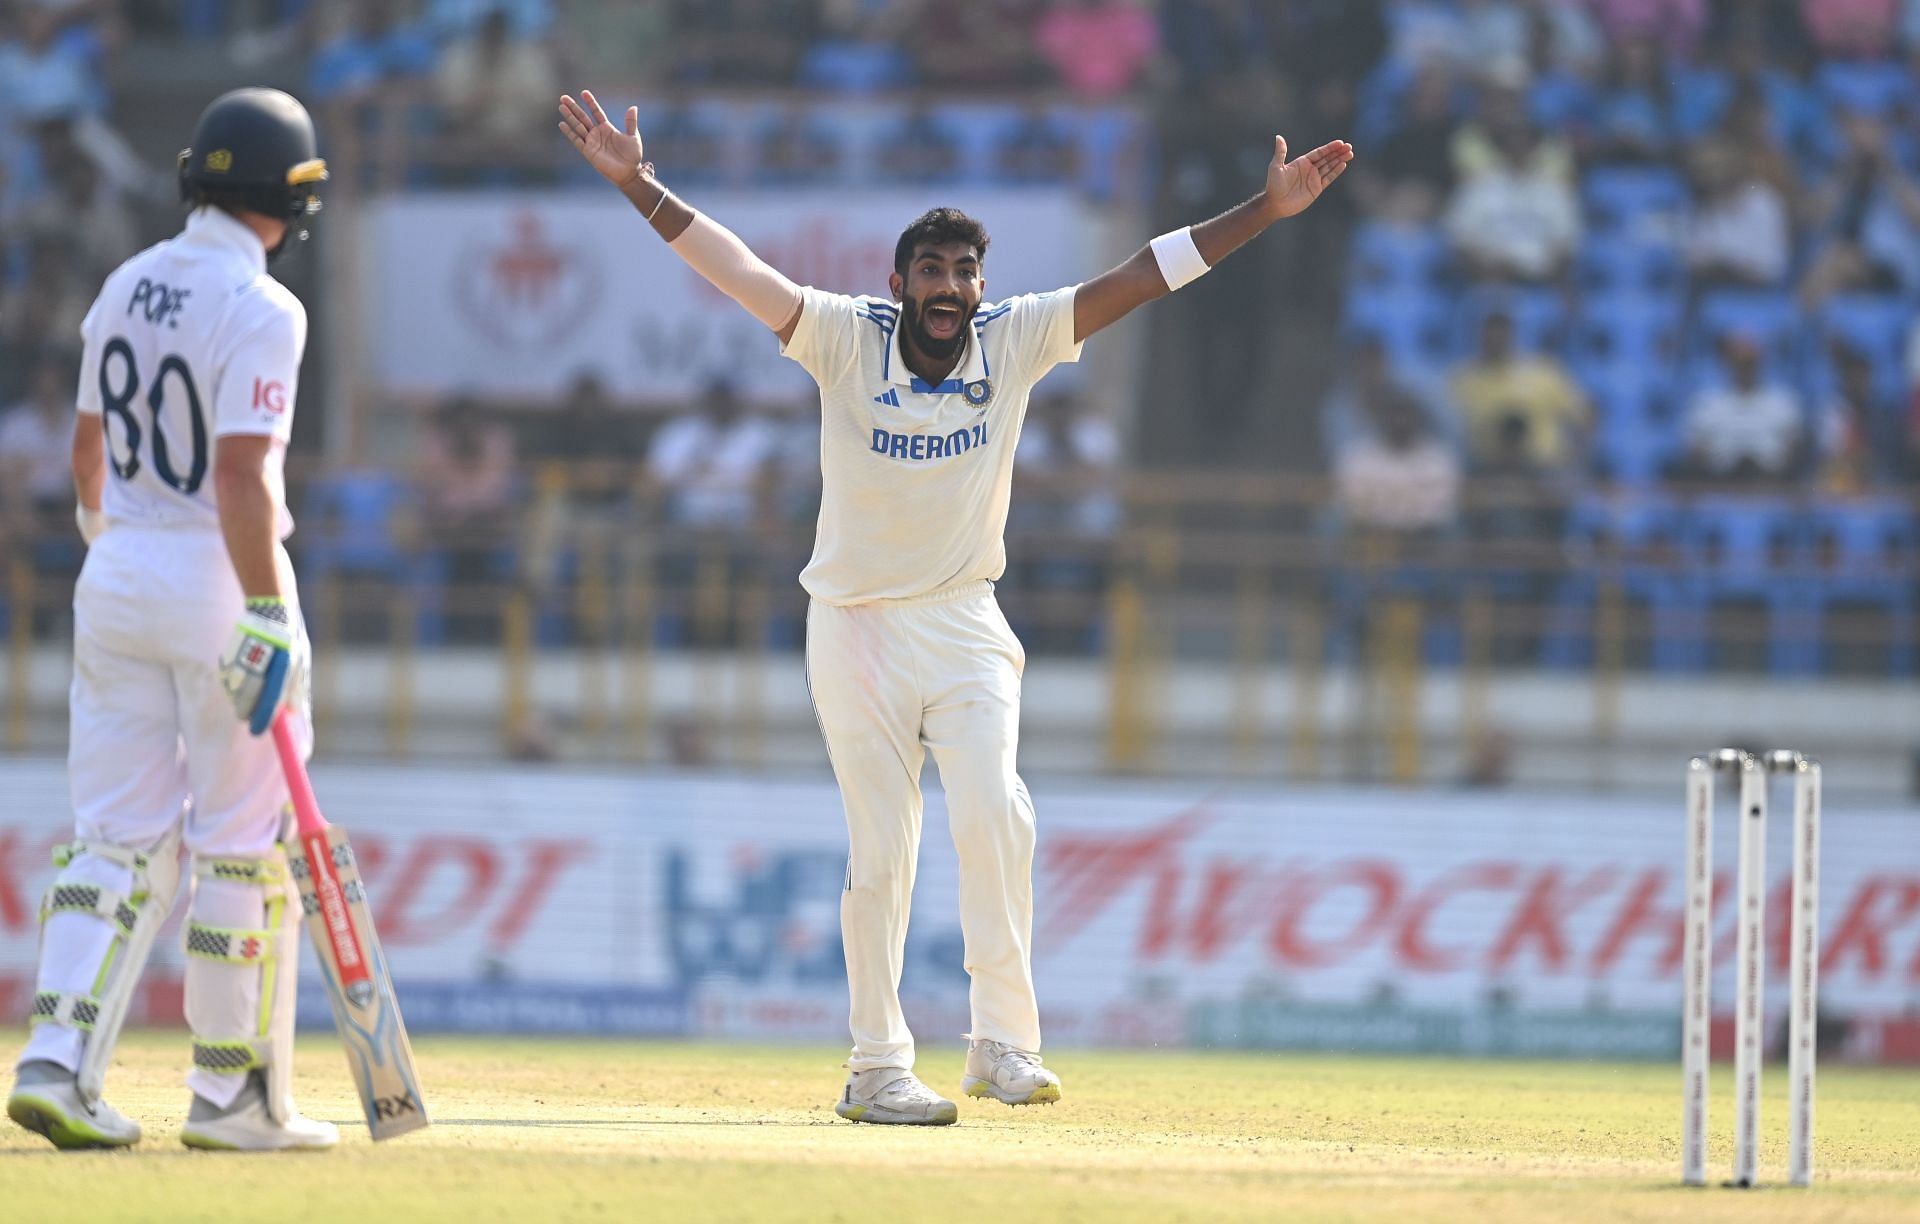 Jasprit Bumrah likely to be rested for Ranchi Test: Reports